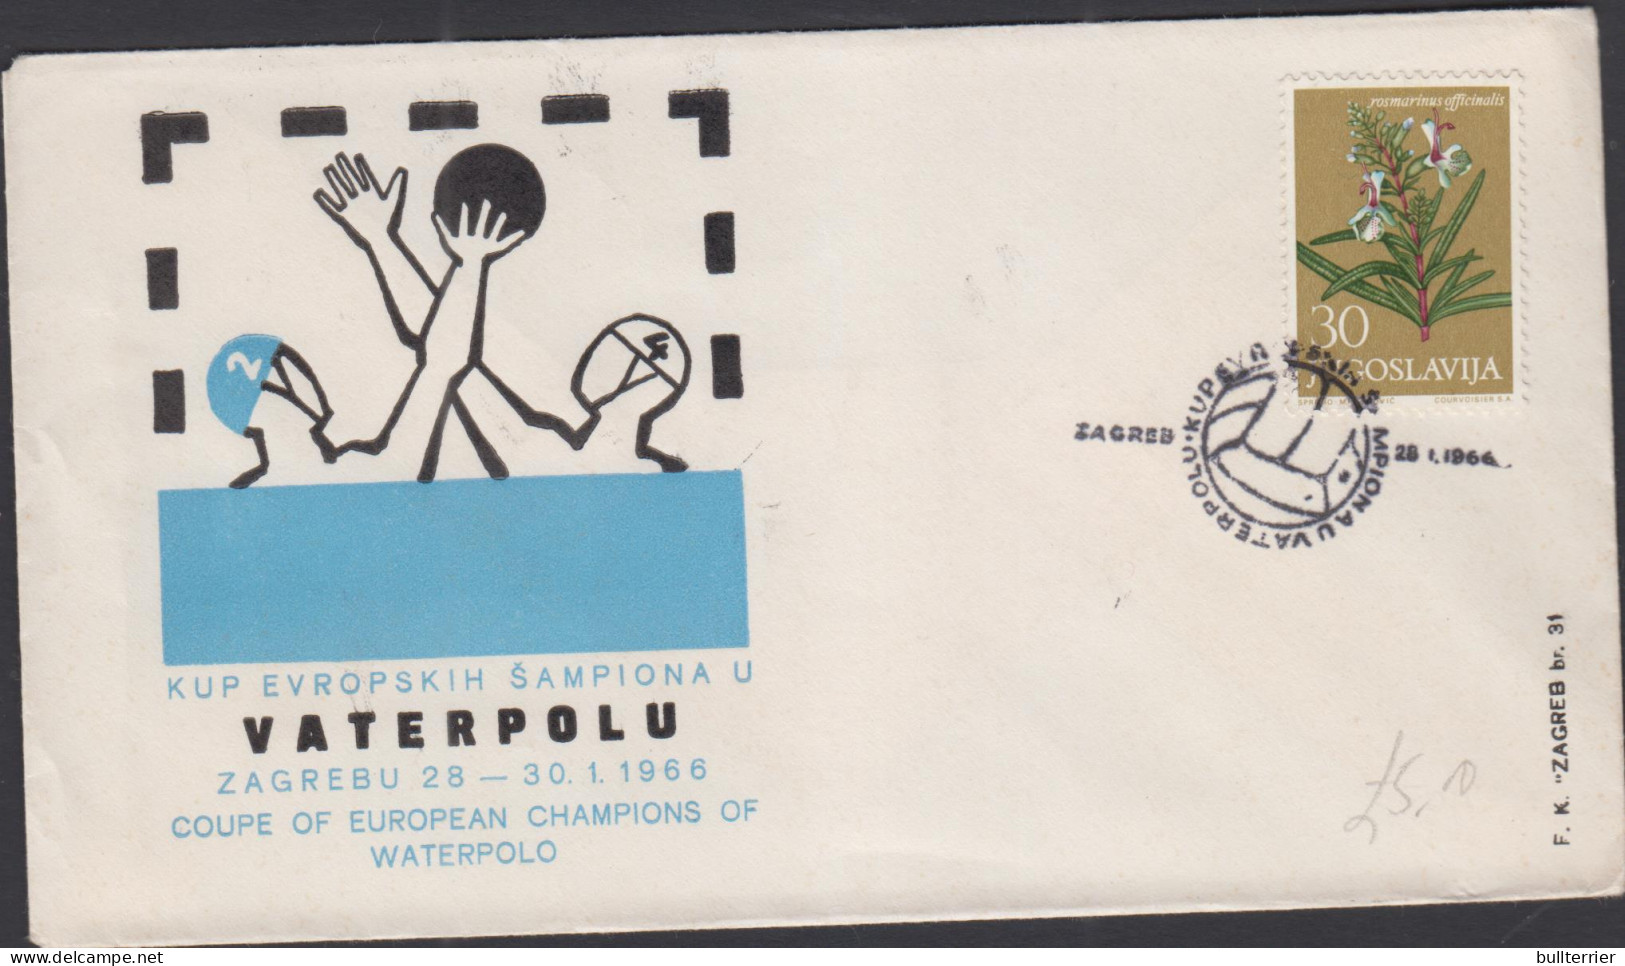 SPORTS - YUGOSLAVIA -1966- ILLUSTRATED COVER AND POSTMARK WATER POLO CUP - INTERESTING ITEM  - Wasserball